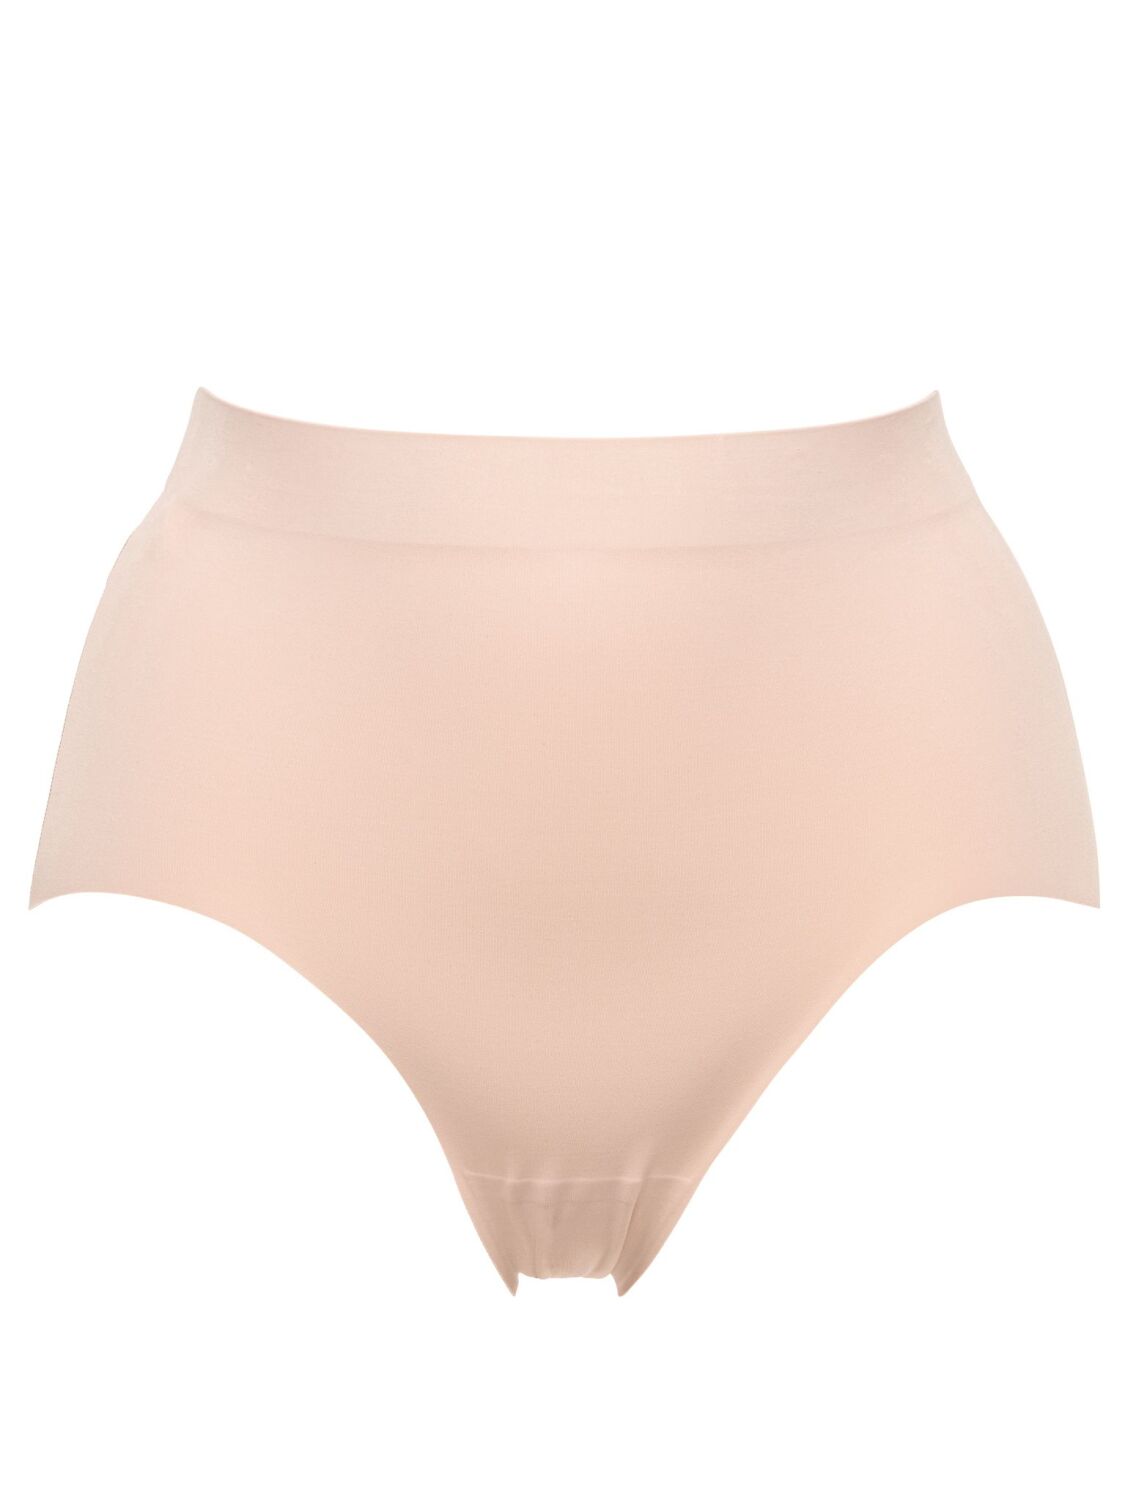 Sans Complexe Taillenslip PERFECT TOUCH Farbe Nude